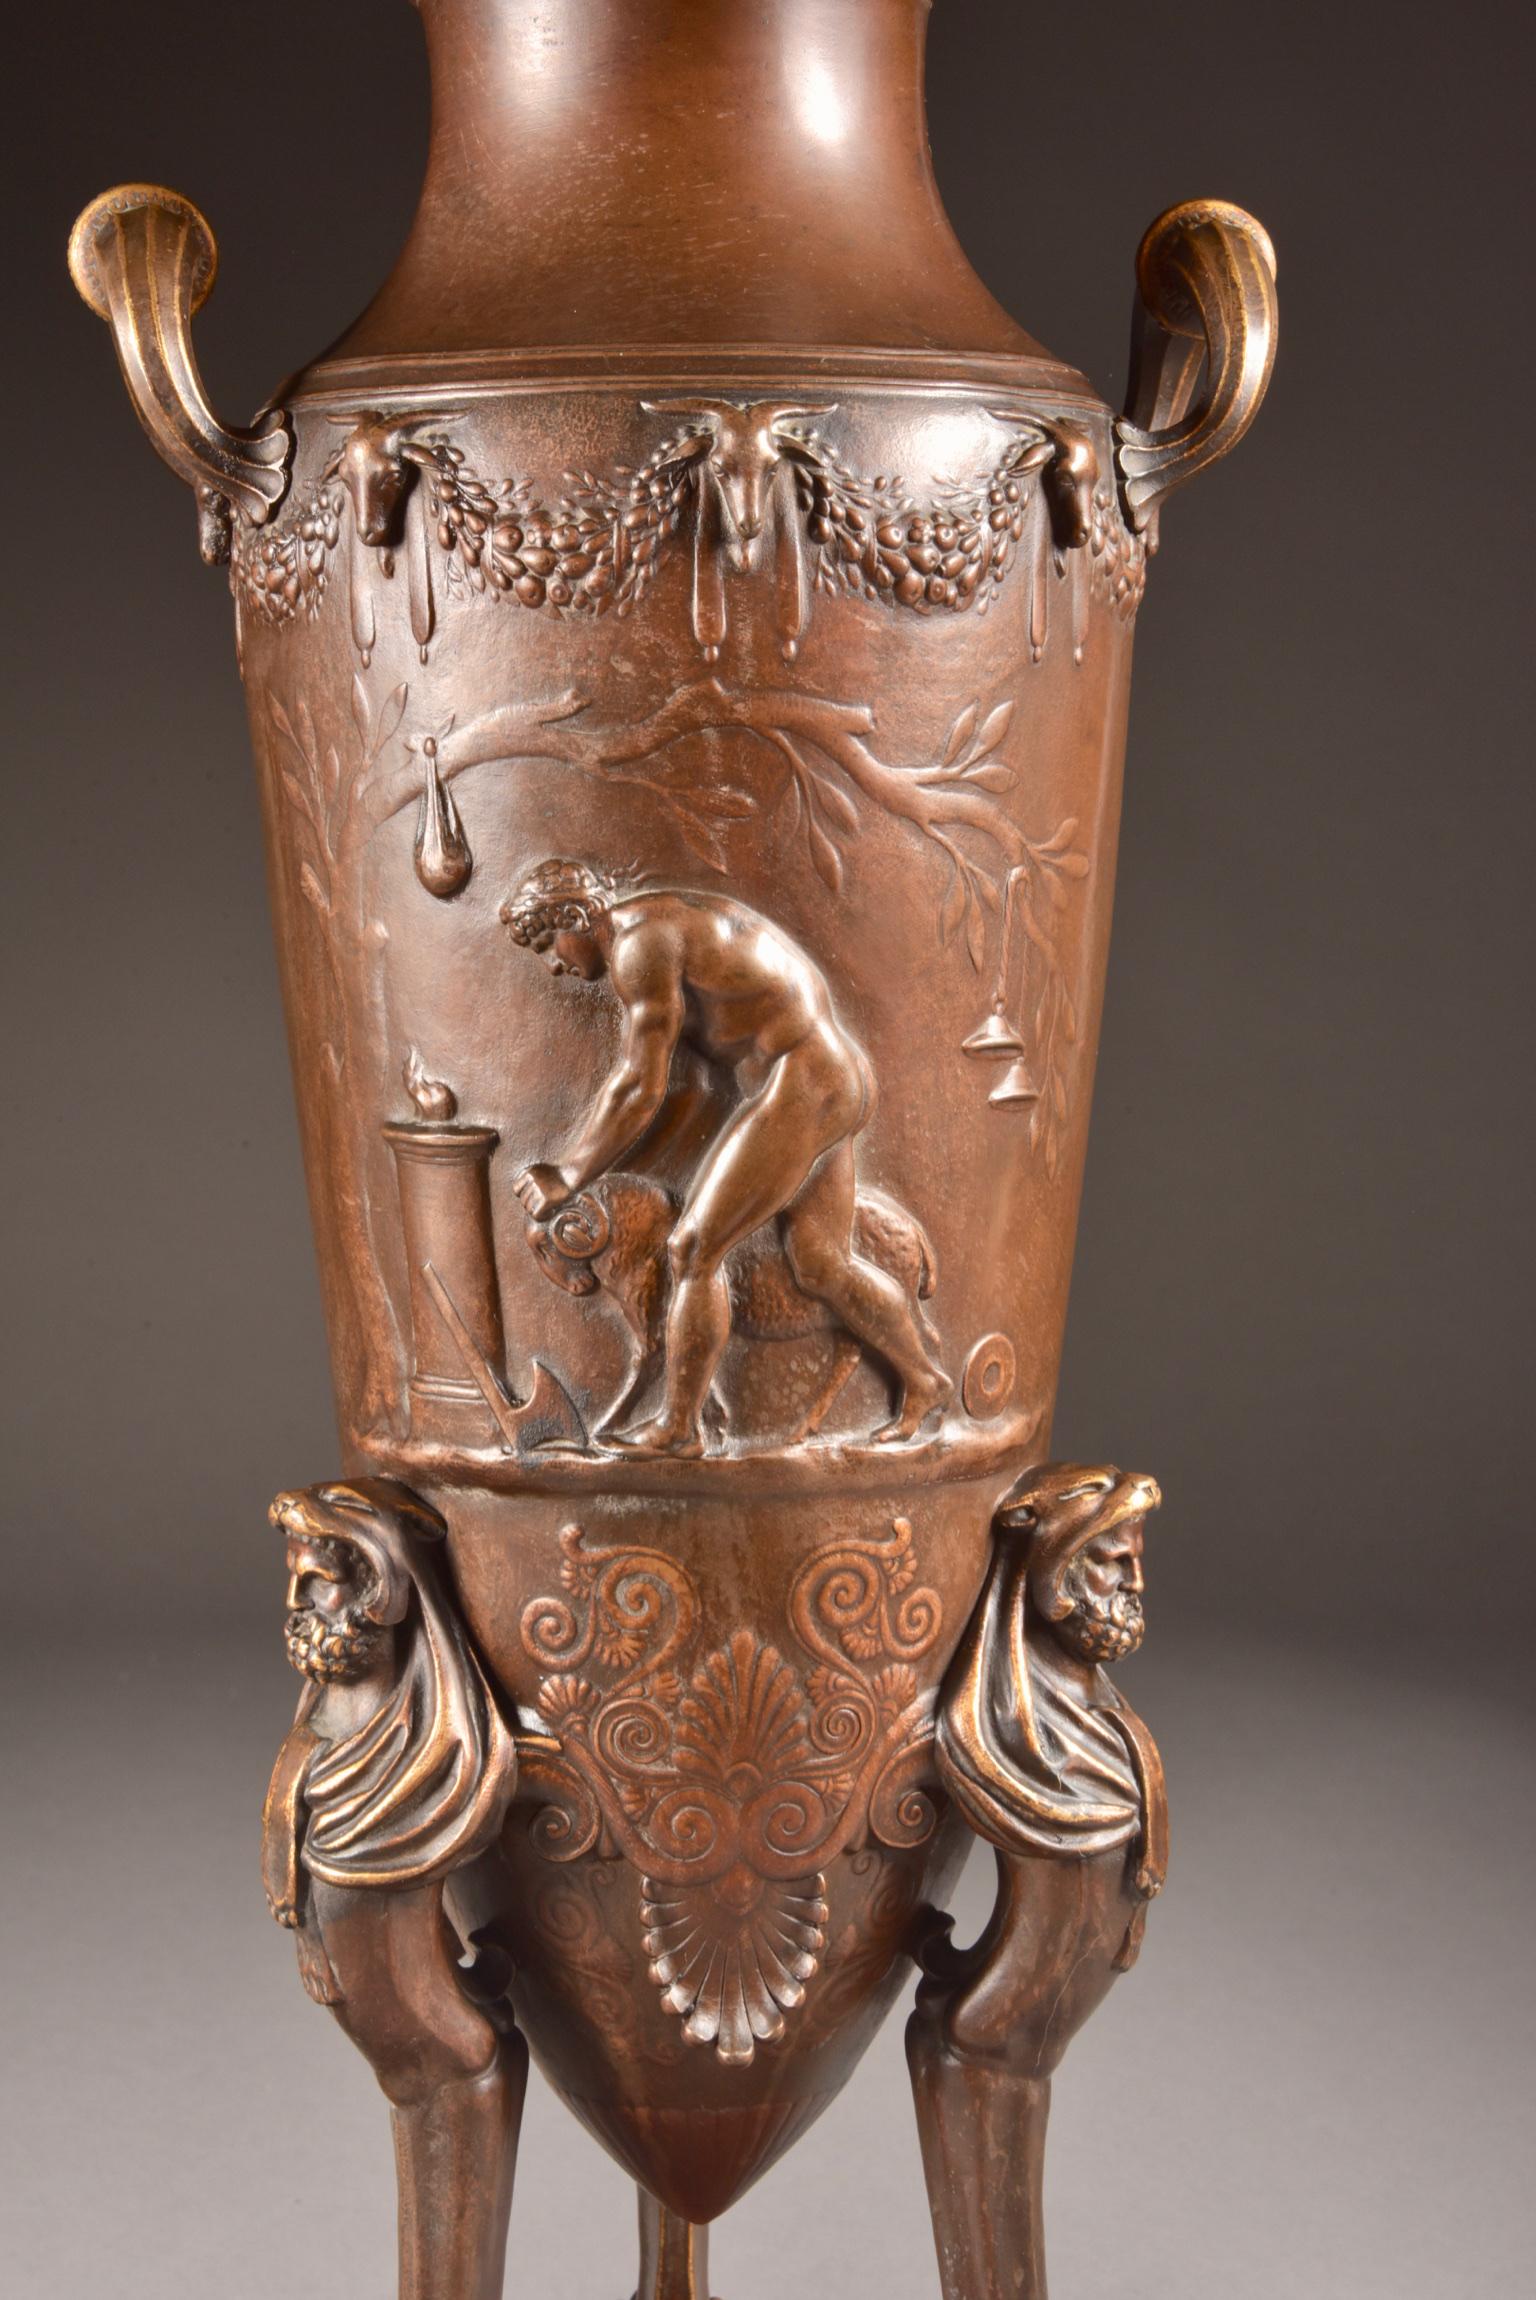 Pair of large, famous world of Greek style amphora or Kantharos - representation of Dionysus or Bacchus worship by F. Levillain and foundry F. Barbedienne in 1871.

F. Levillain (1837-1905) received a gold medal in 1878 for his Neo-Greek